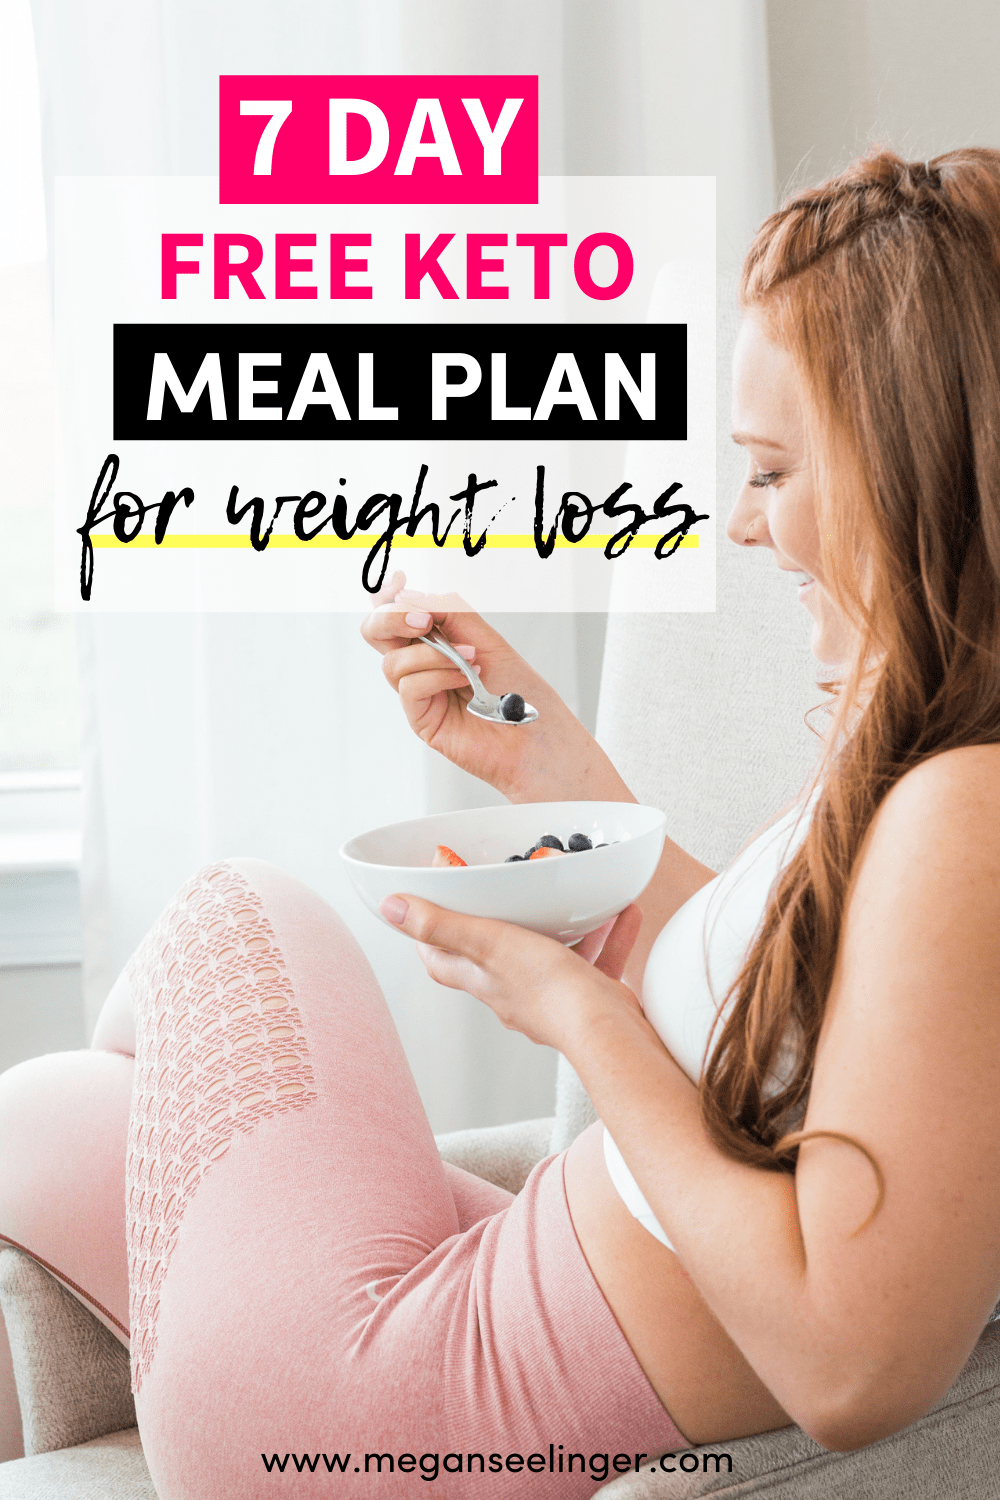 Free 7 Day Keto Meal Plan For Weight Loss + How To Meal Prep For The Week —  Megan Seelinger Coaching